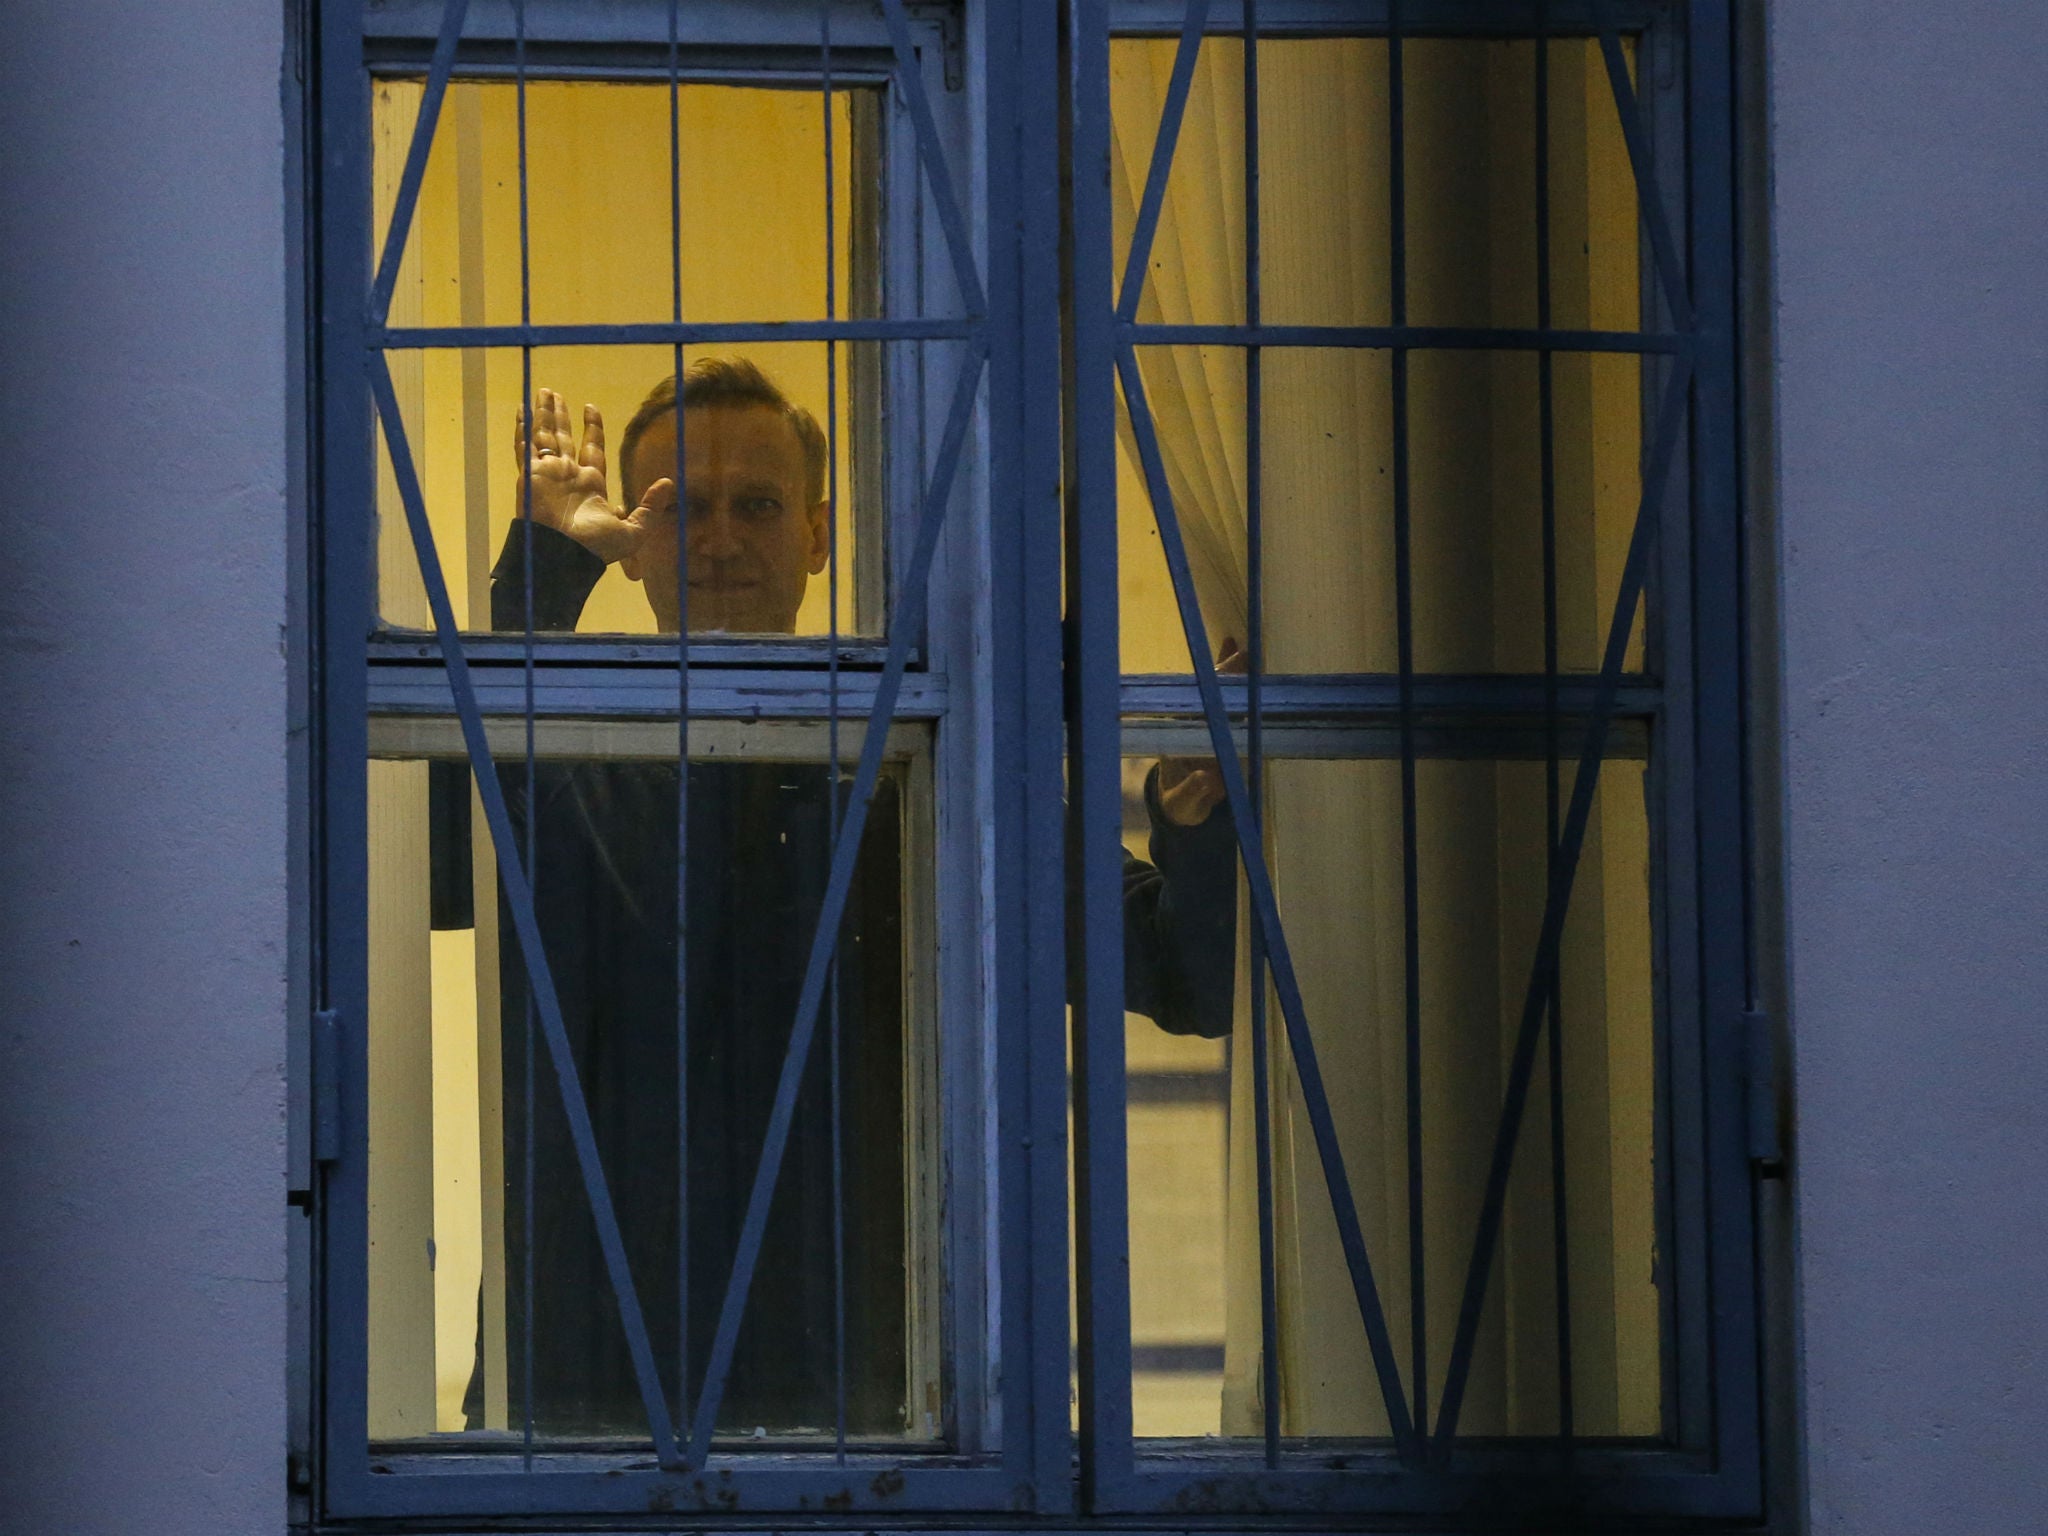 Alexei Navalny live streamed his detention and urged protesters to come out onto the streets as planned